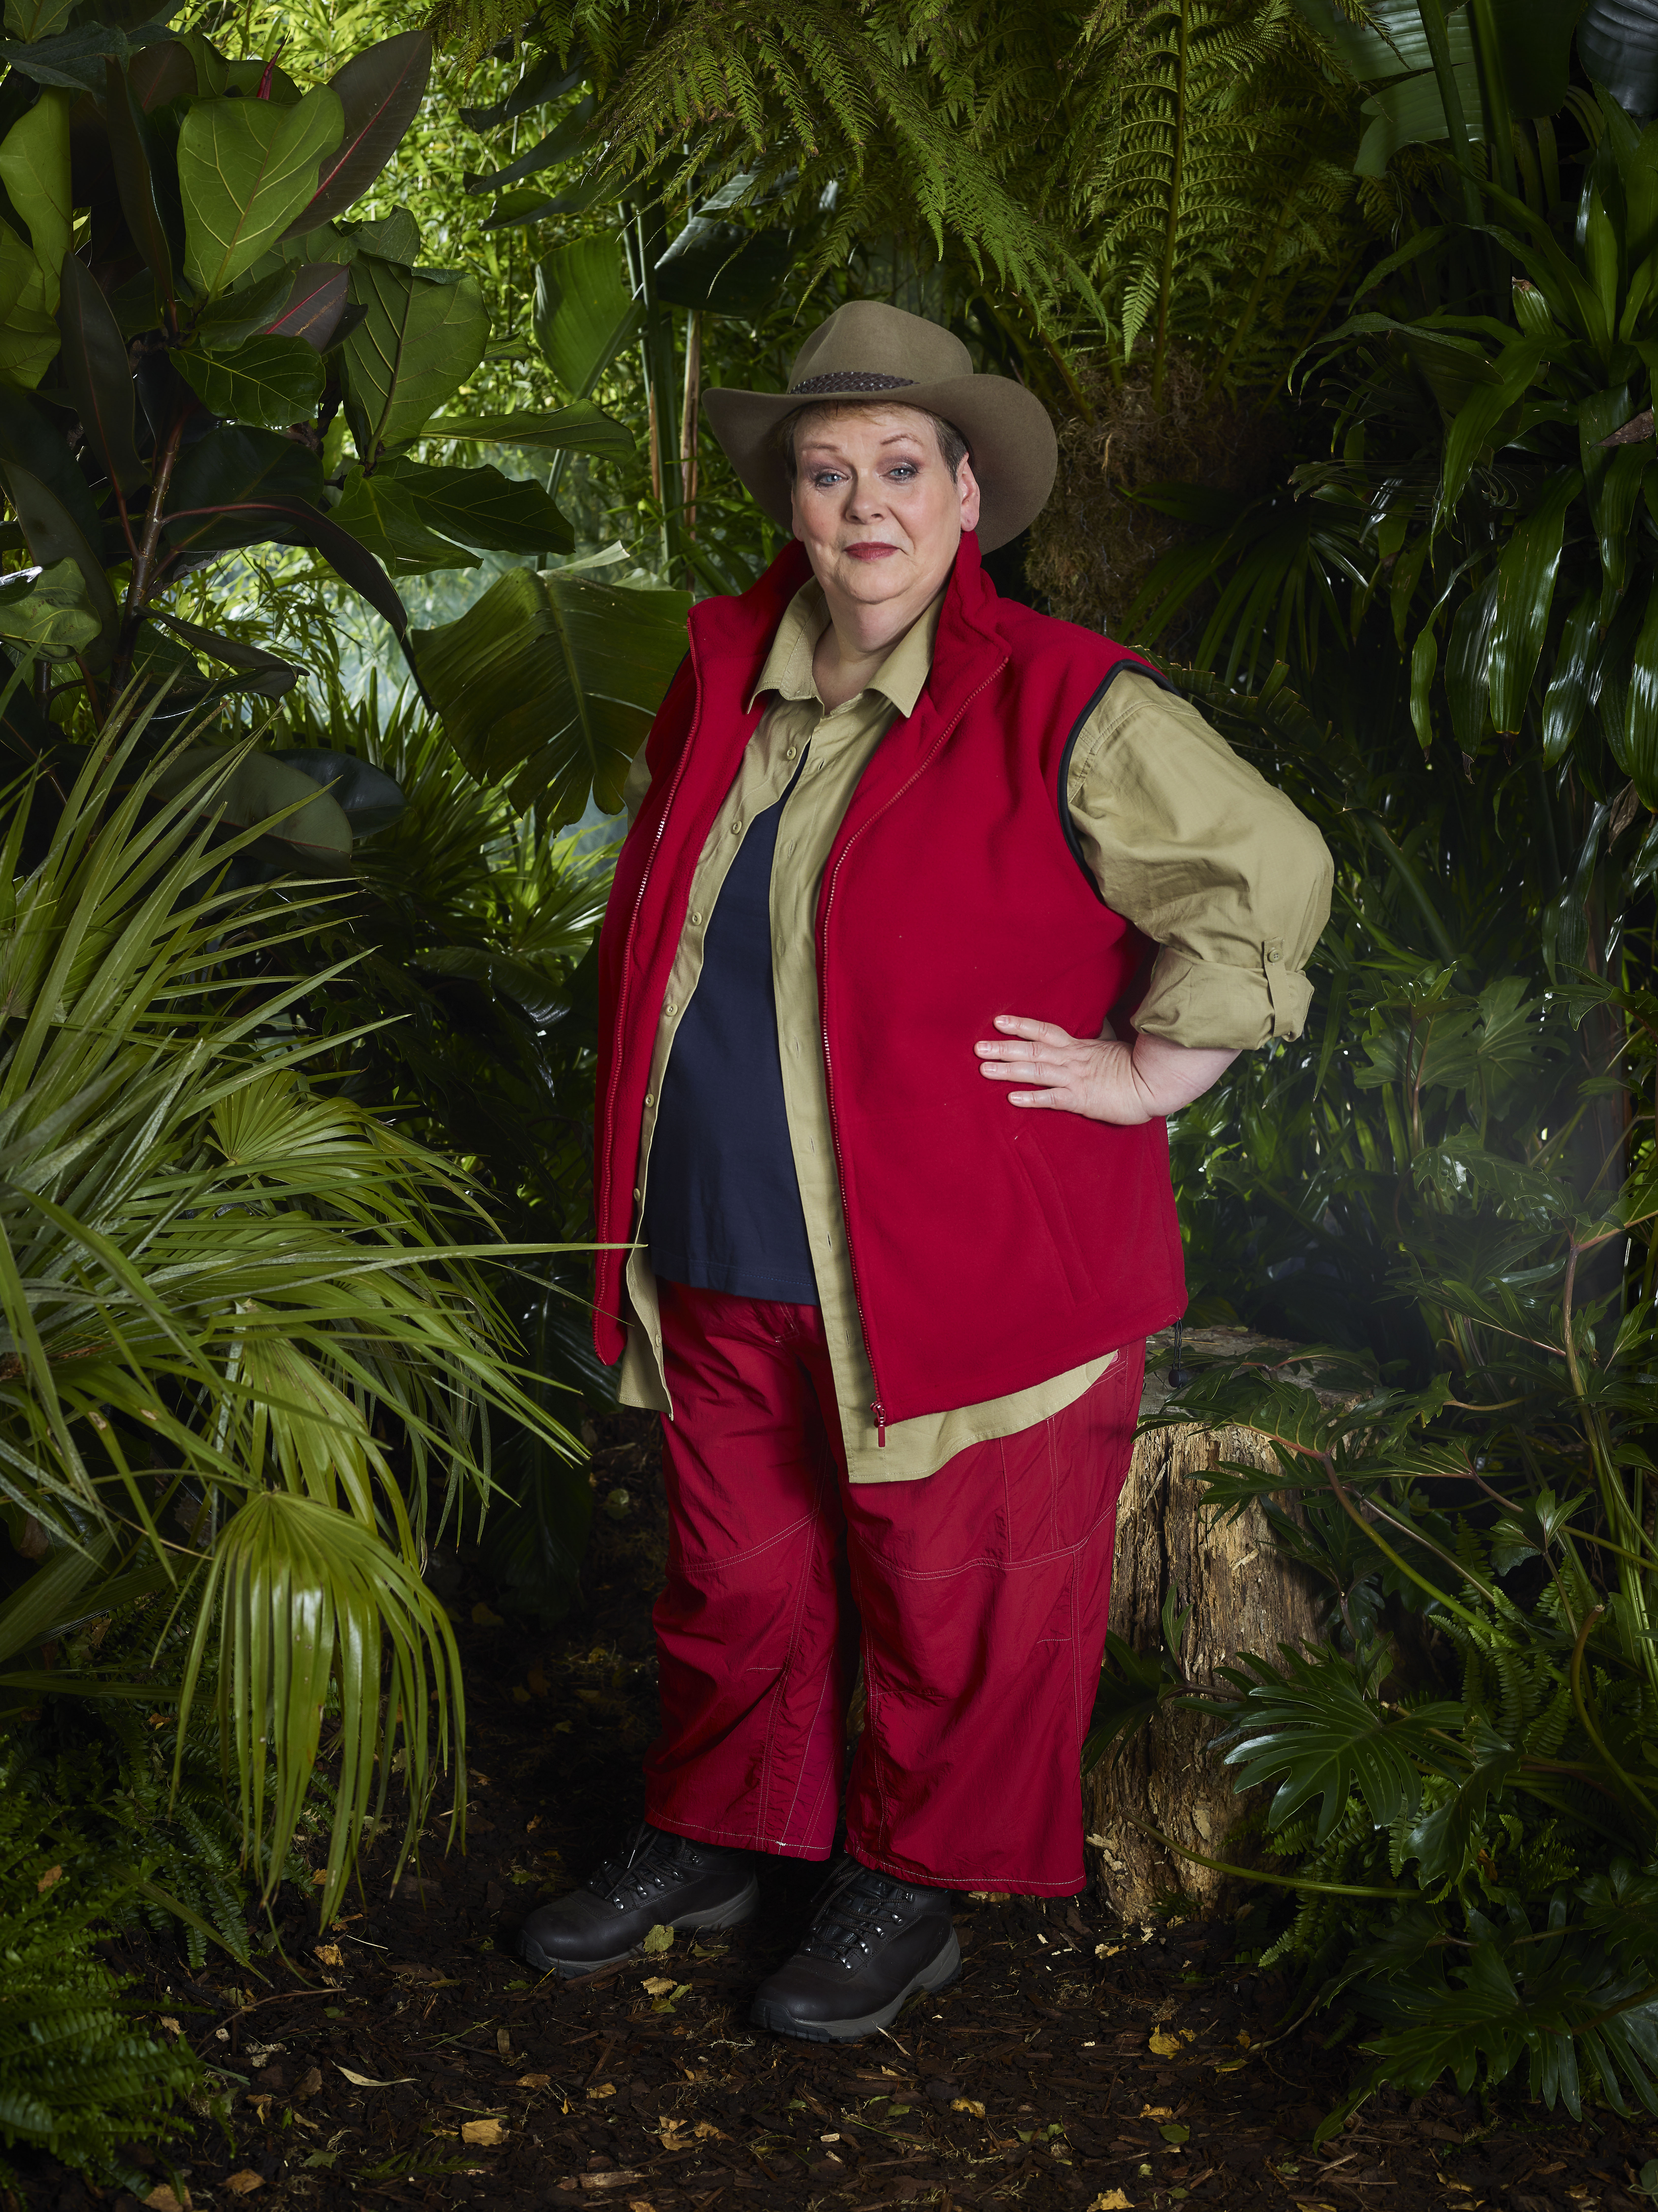 Anne Hegerty on I'm A Celebrity